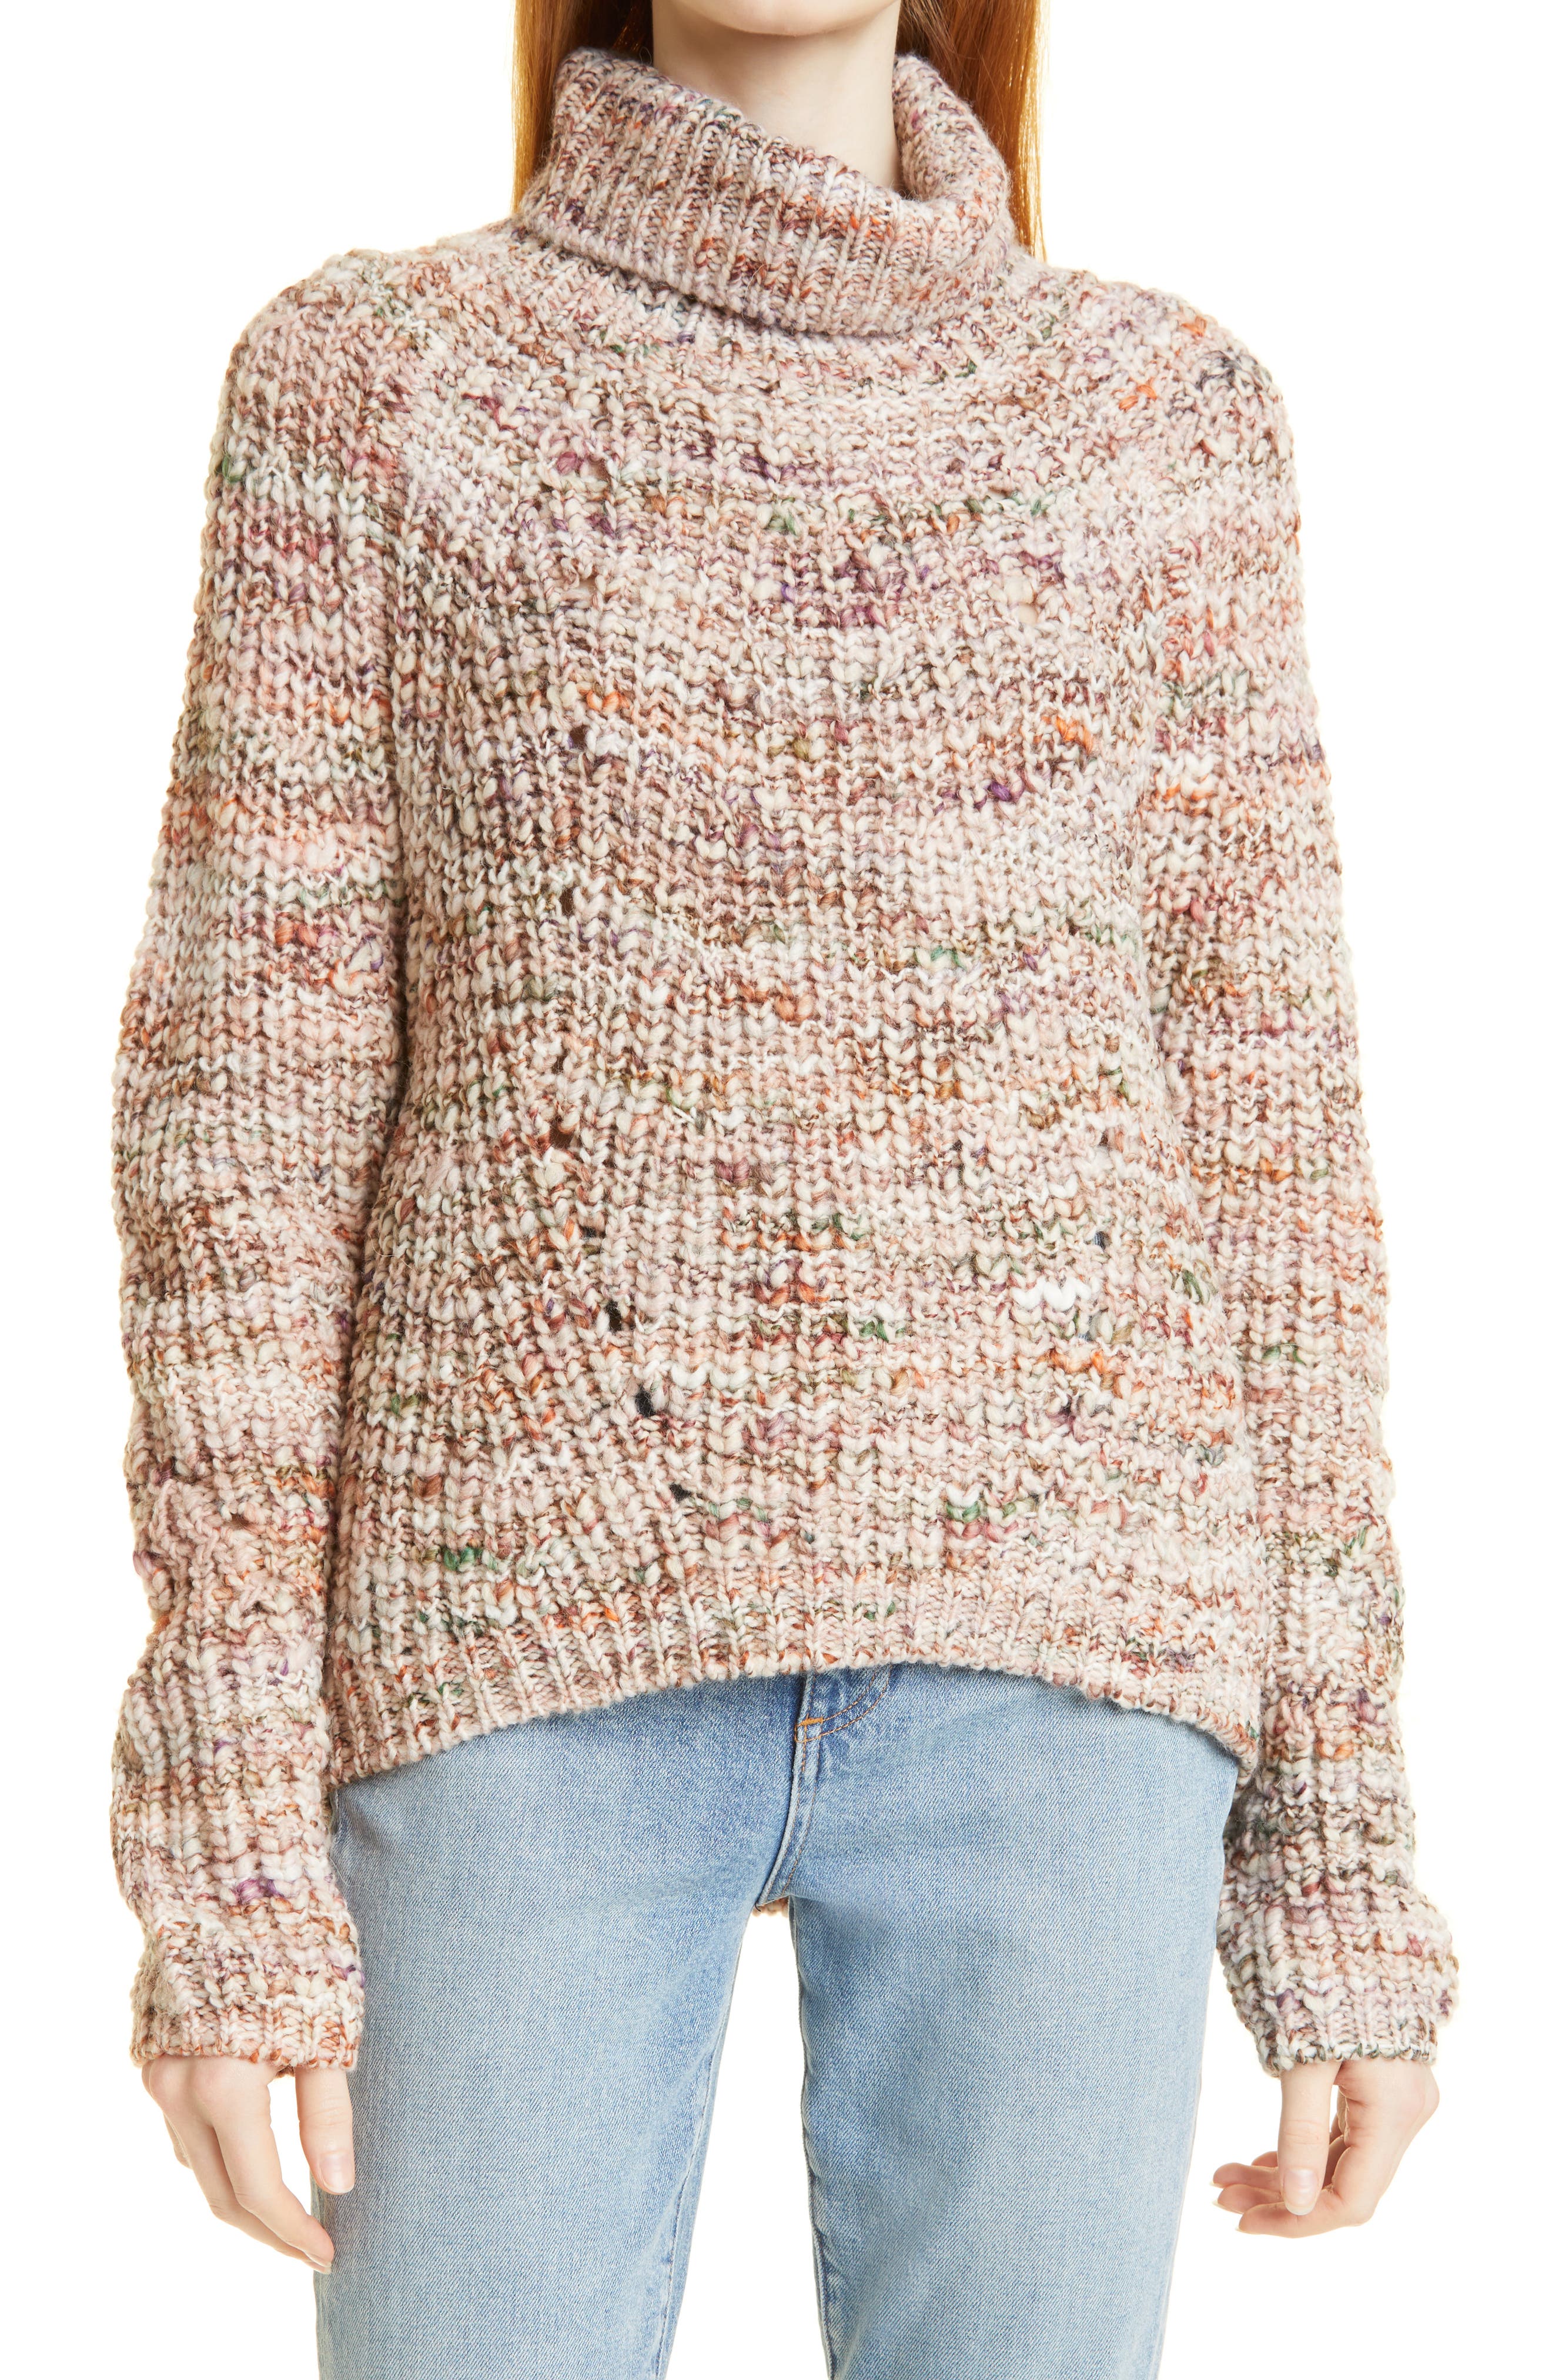 LINE Luxie Marled Turtleneck Sweater in Nostalgia at Nordstrom